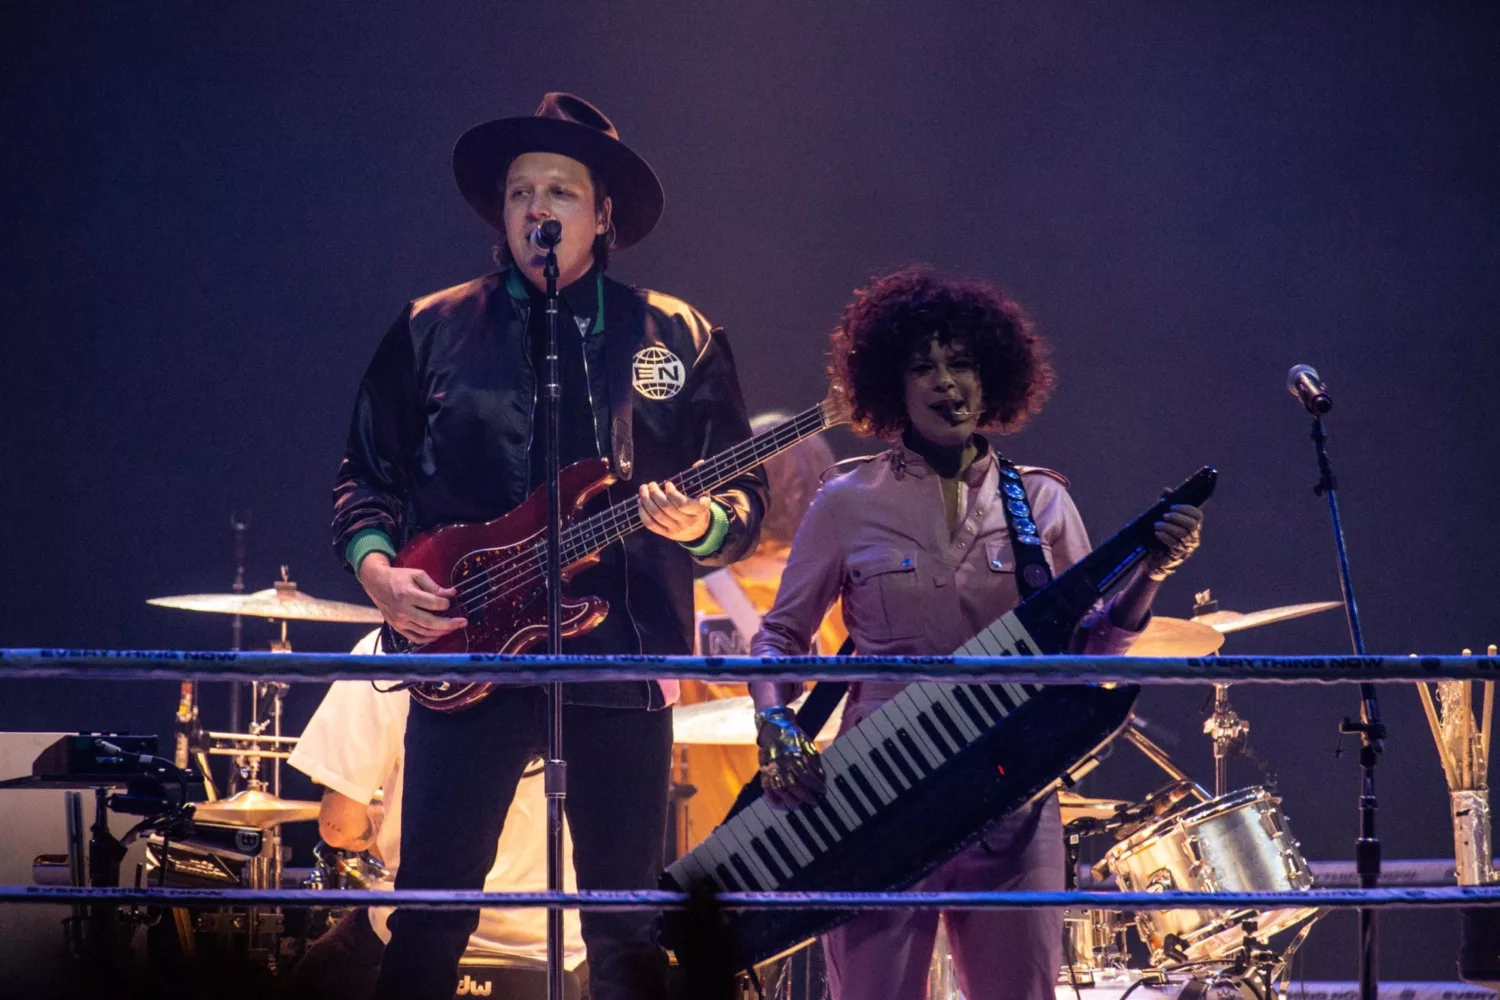 Arcade Fire's Win Butler says he's written "records and records" of material during lockdown